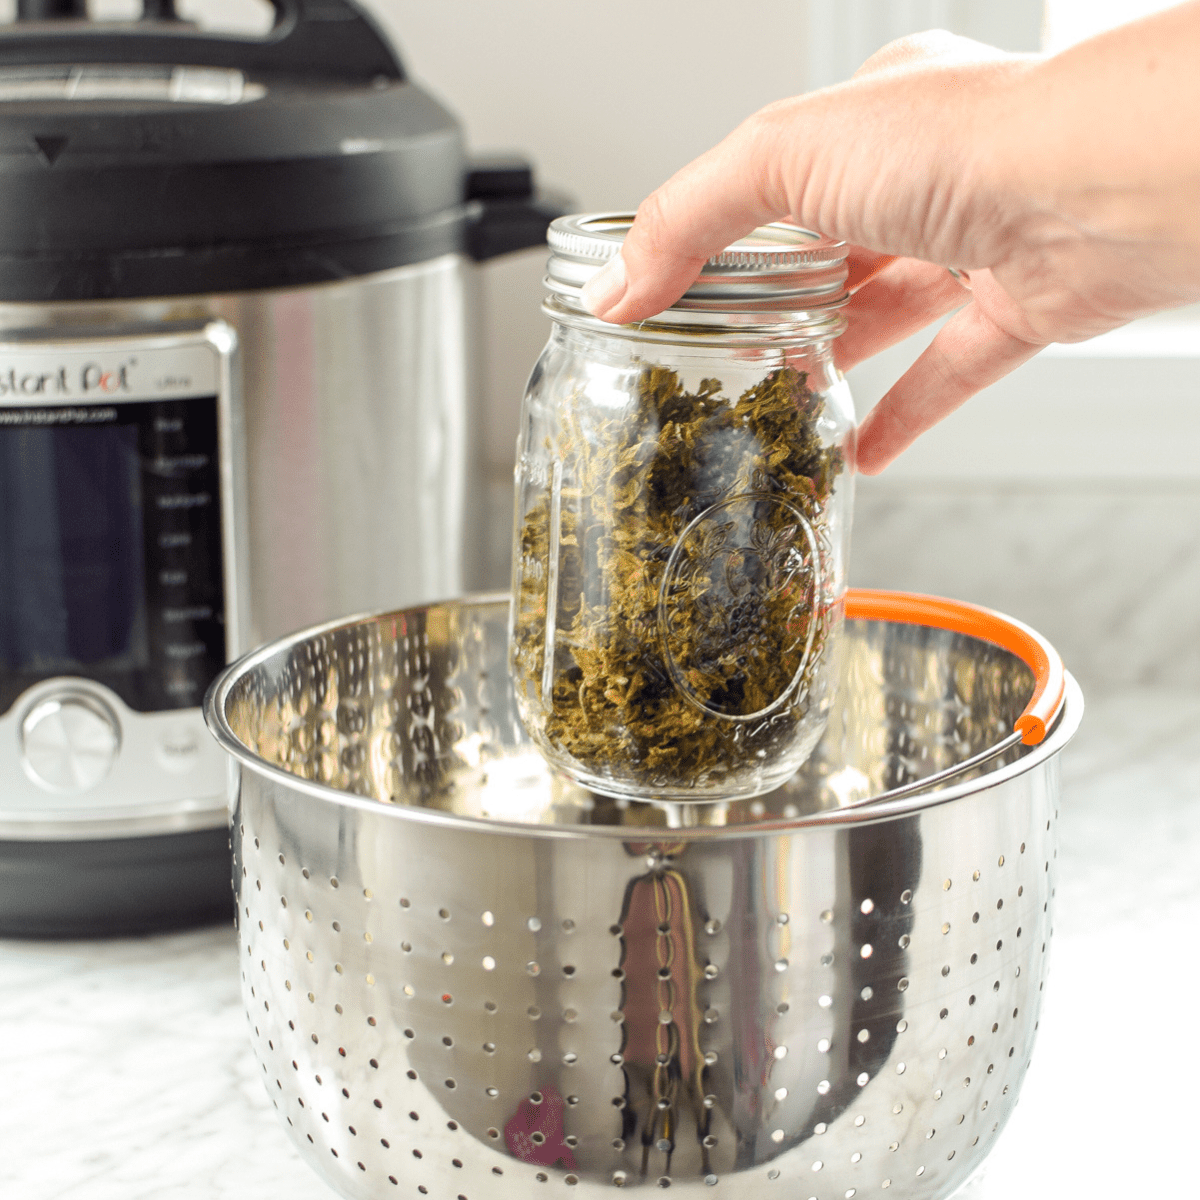 How To Decarb In An Instant Pot » No Smell Method » Emily Kyle, MS, RDN